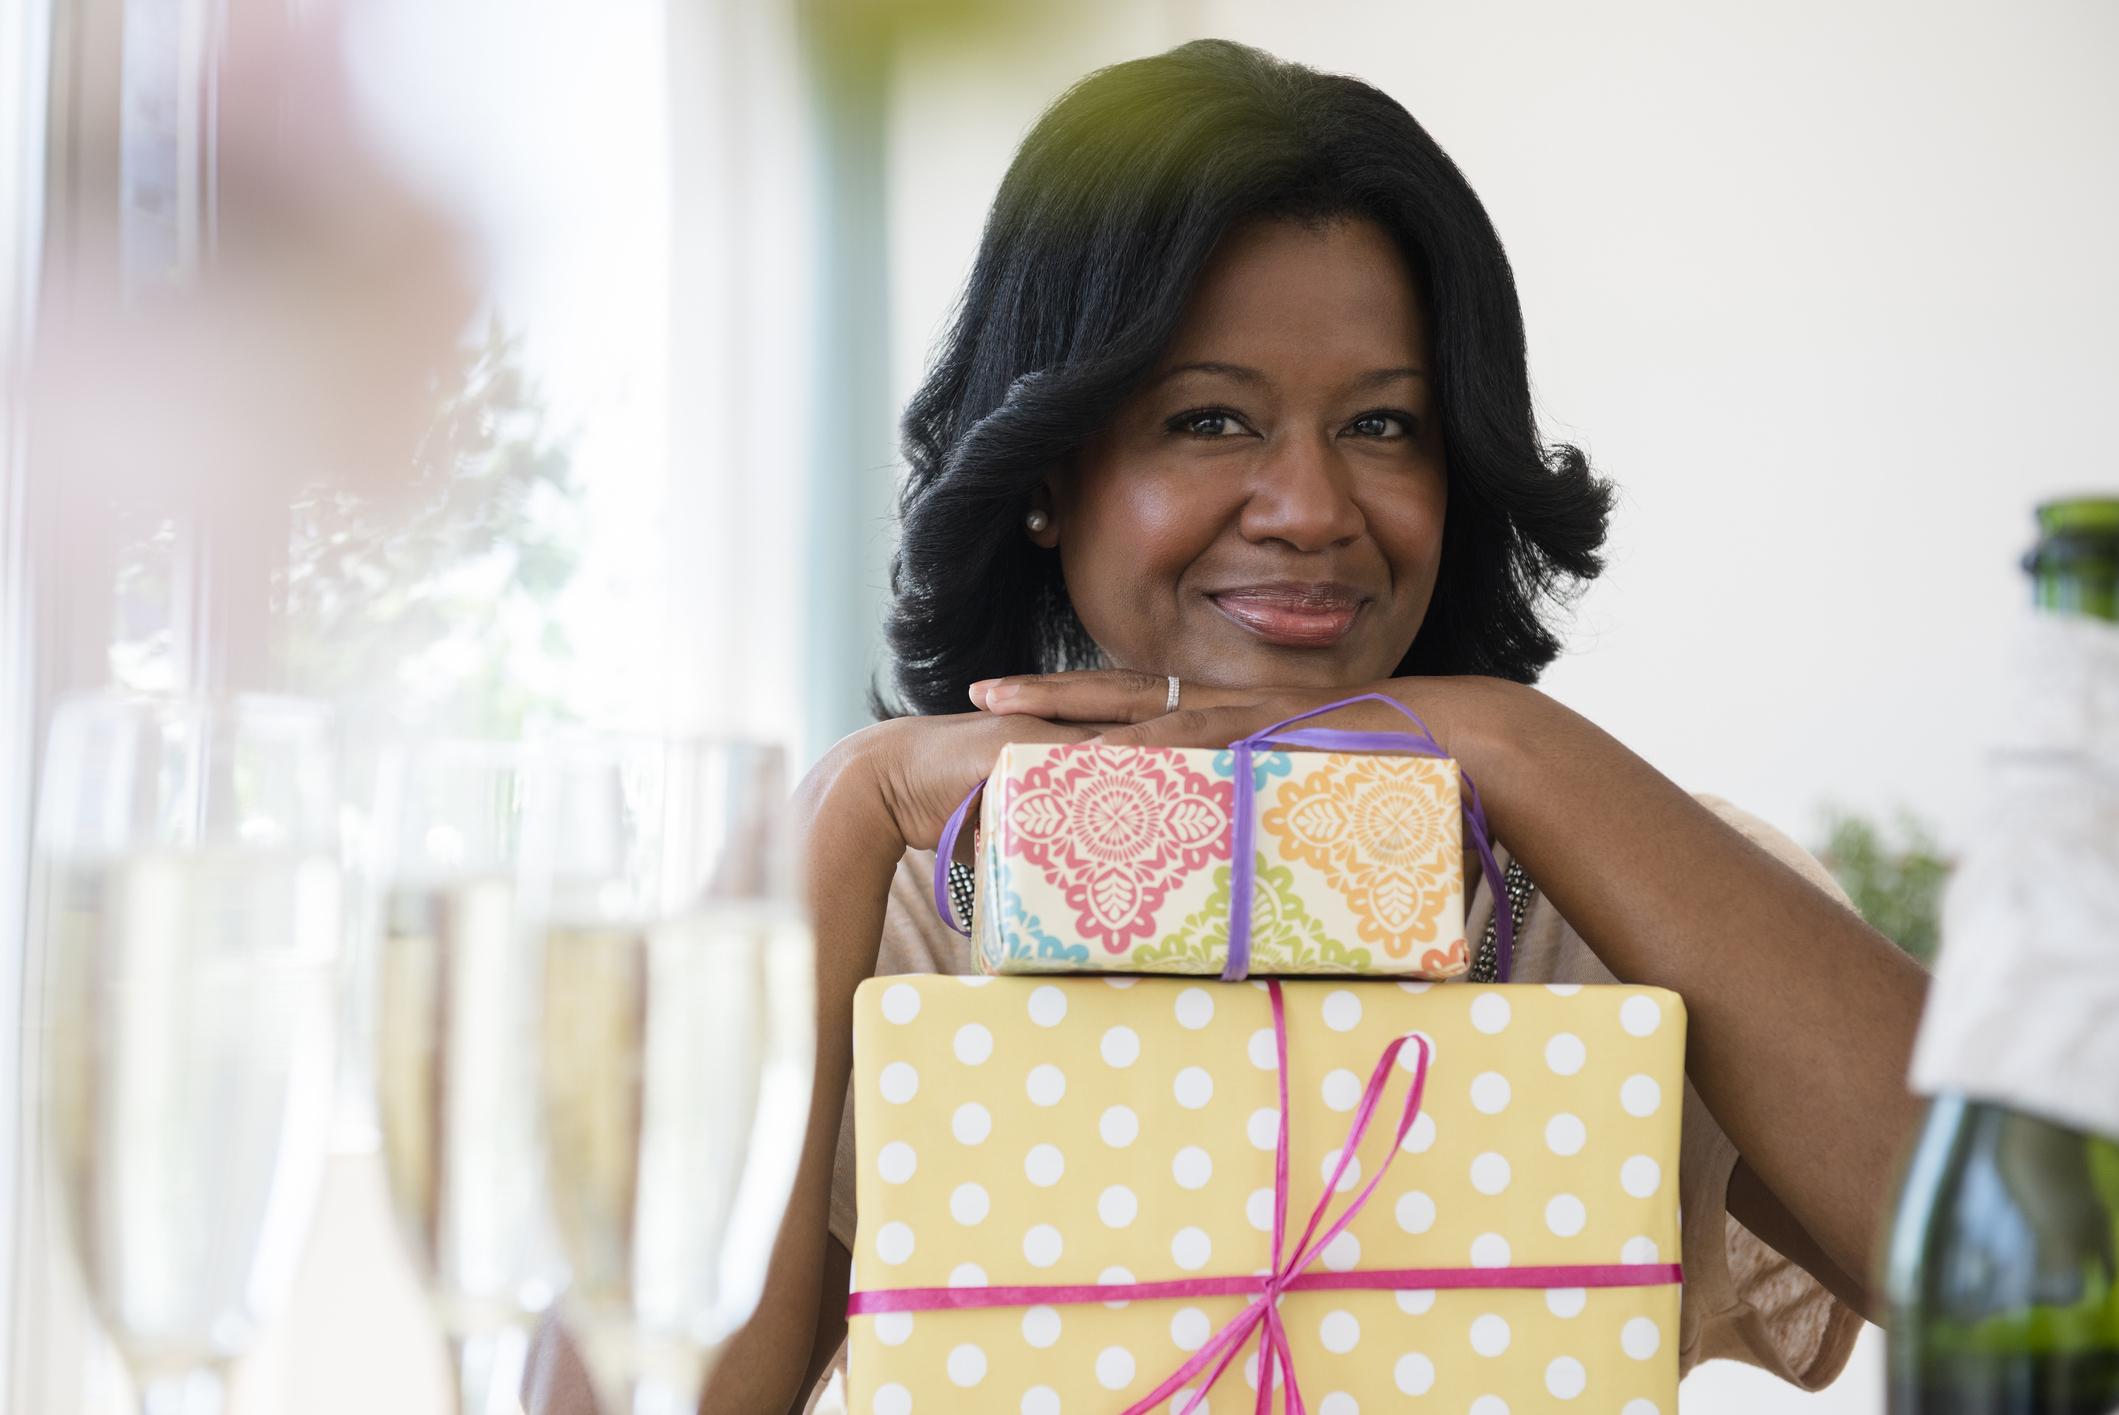 Woman smiling with a stack of gifts, expressing contentment